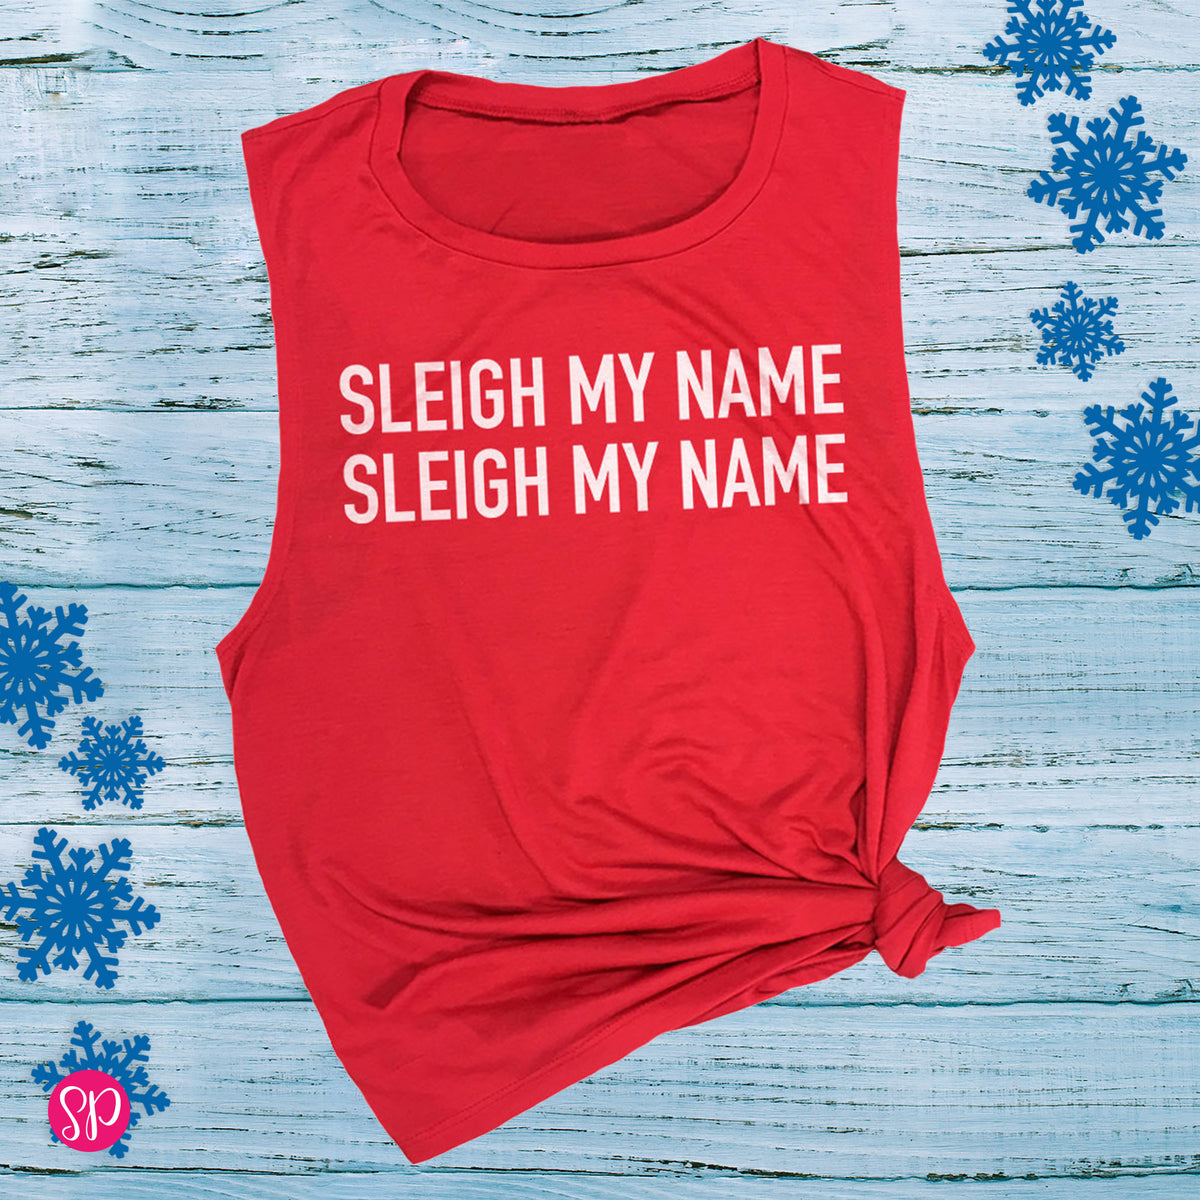 Sleigh My Name Funny Santa Claus Holiday Christmas Graphic Muscle Tank Top Tee Shirt